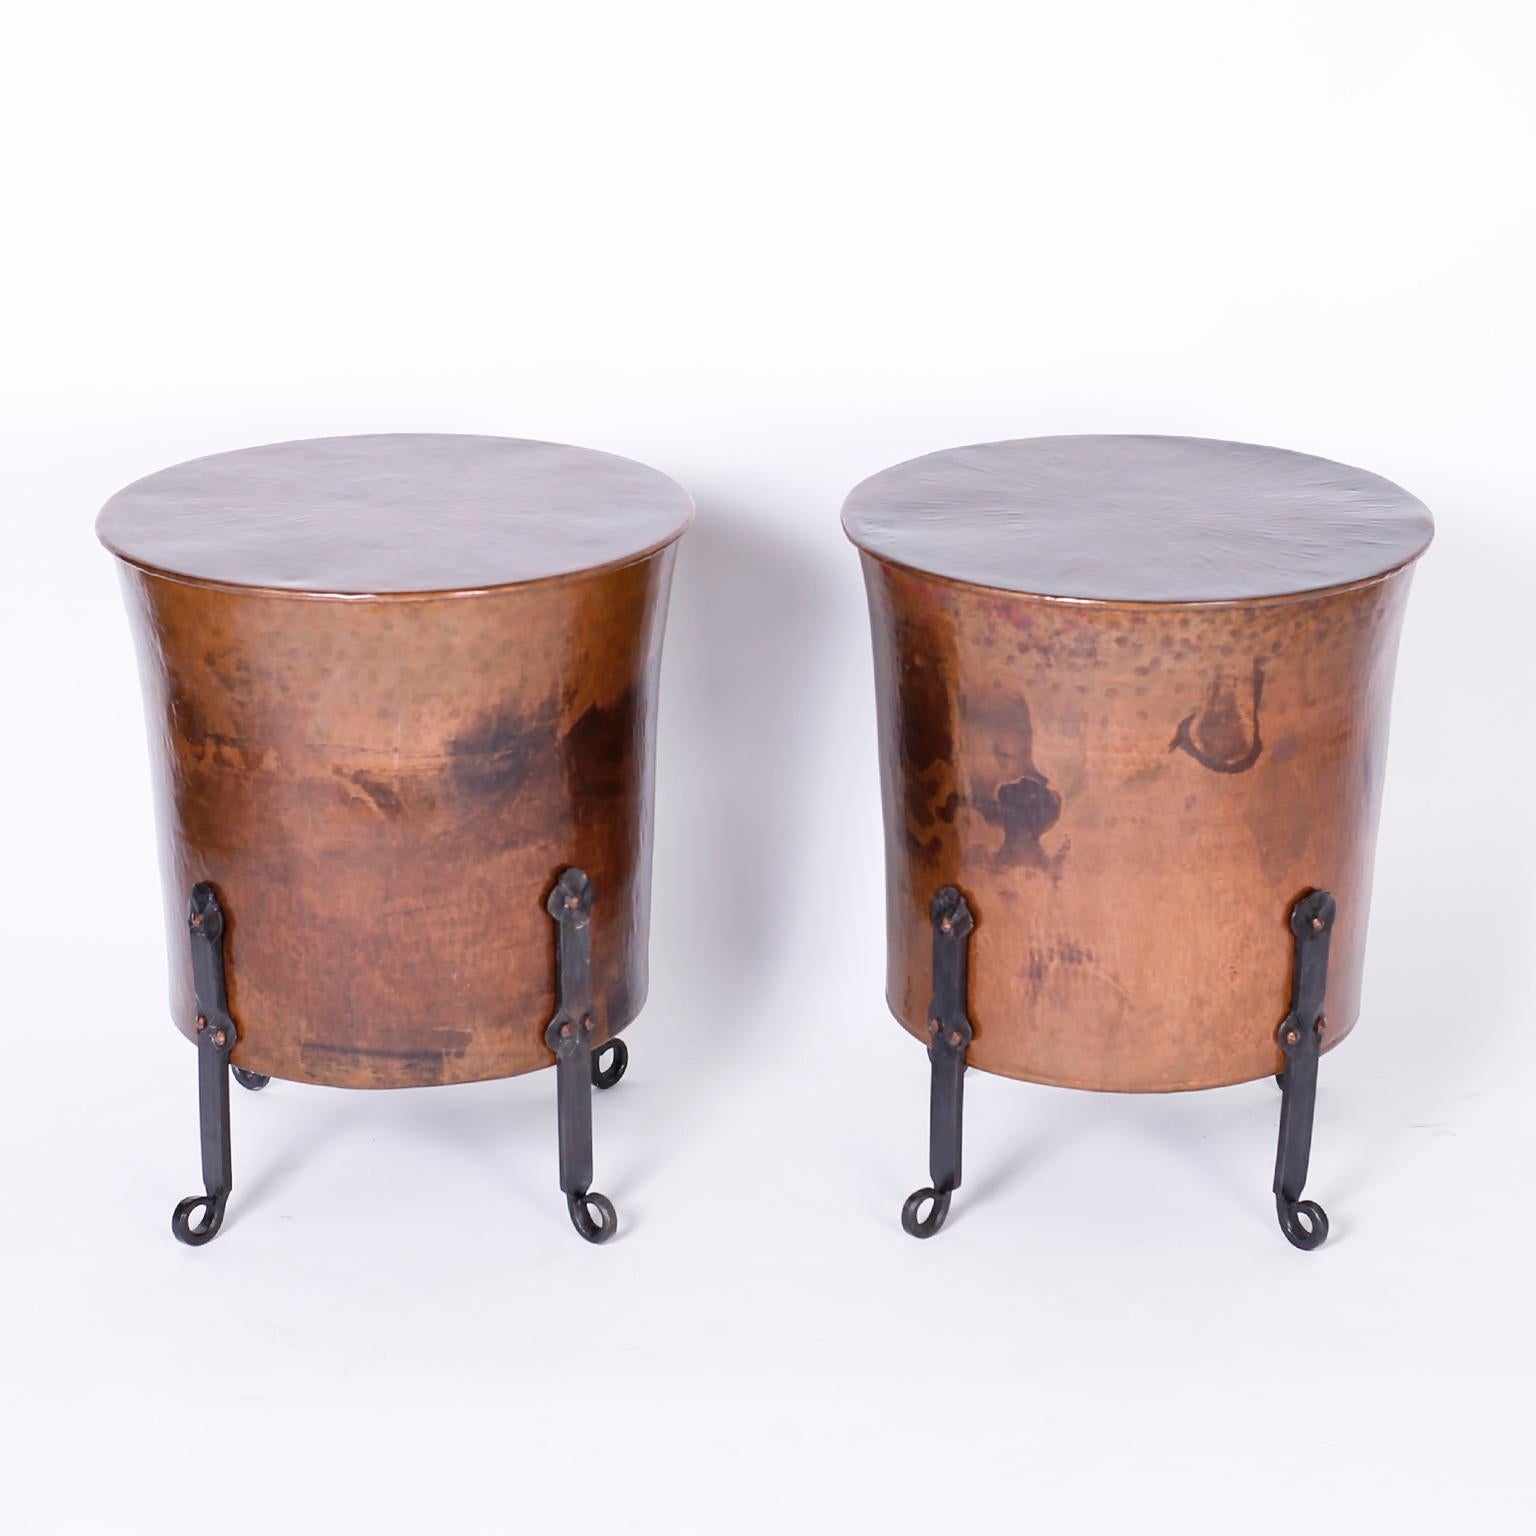 Antique pair of copper and iron stands with hand hammered copper tapered drums having acquired a lofty patina and riveted to four hand hammered graceful iron legs.